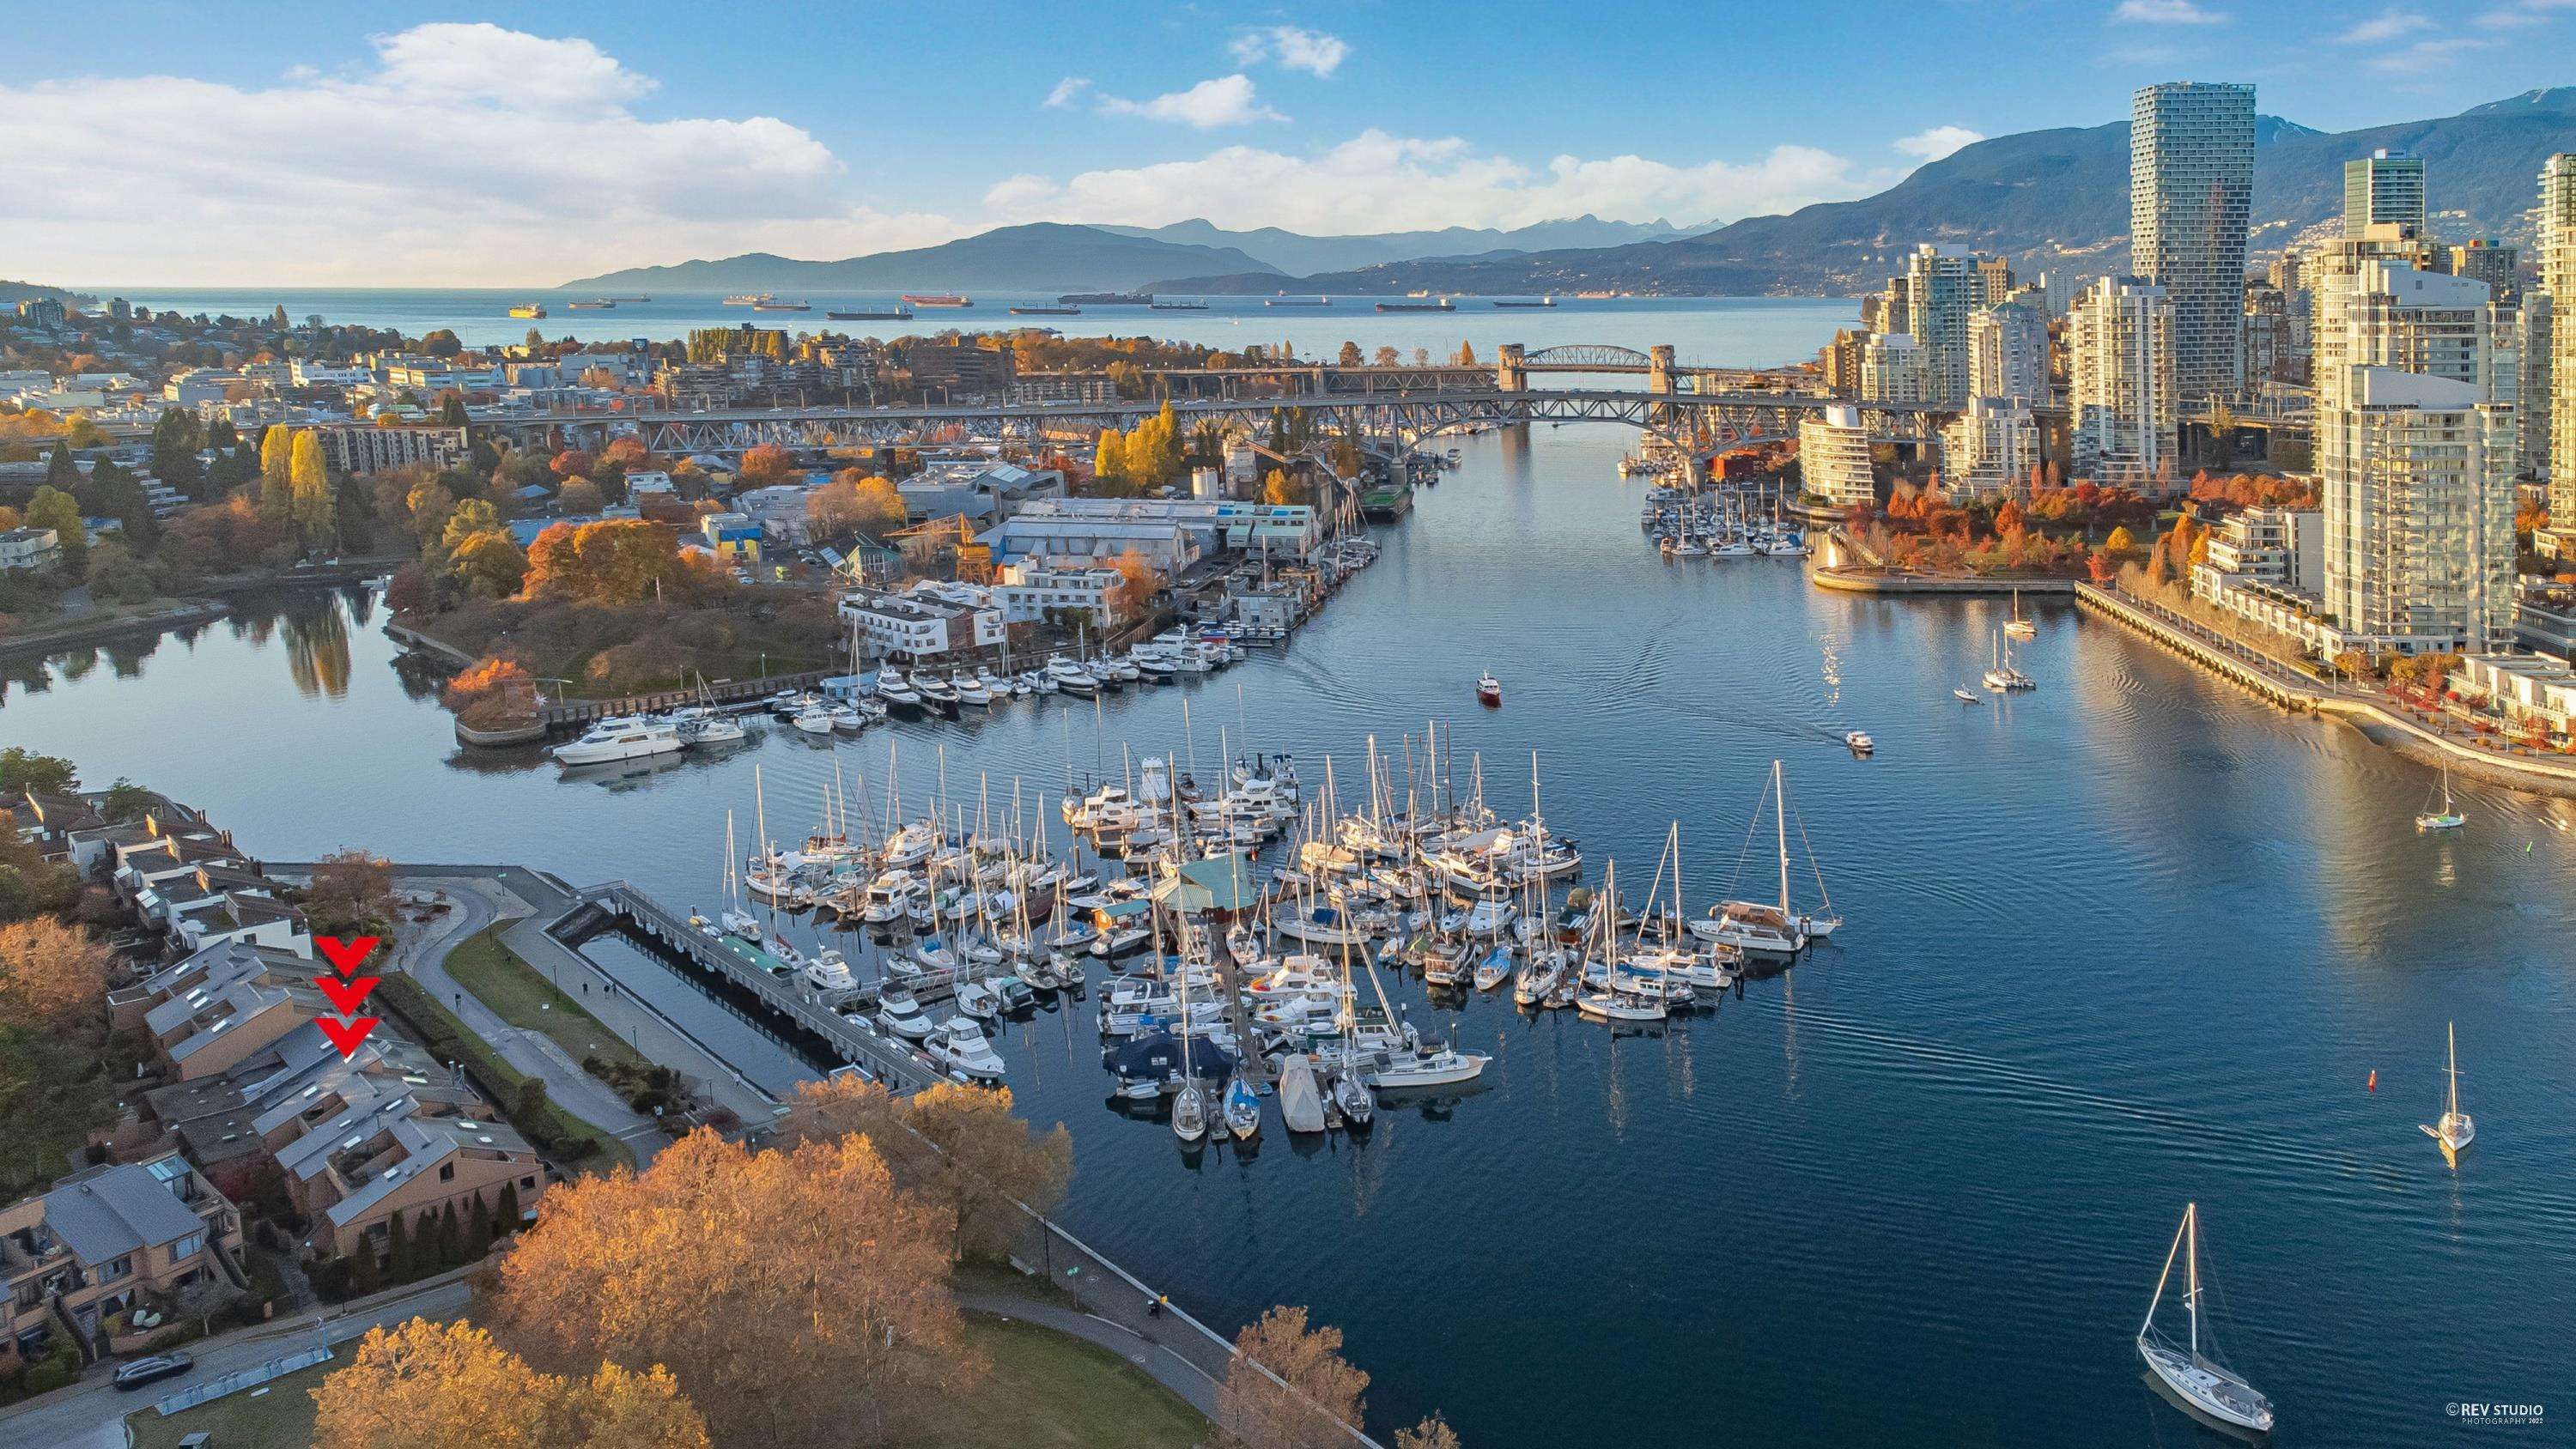 Open House. Open House on Sunday, February 19, 2023 2:00PM - 4:00PM
WATERFRONT TOWNHOUSE w/ stunning water, marina, cityscape and mtn views. 180 degree views W out to English Bay sunsets and E to the Cambie St. Bridge sunrises. Renovation by Colbrone Arch